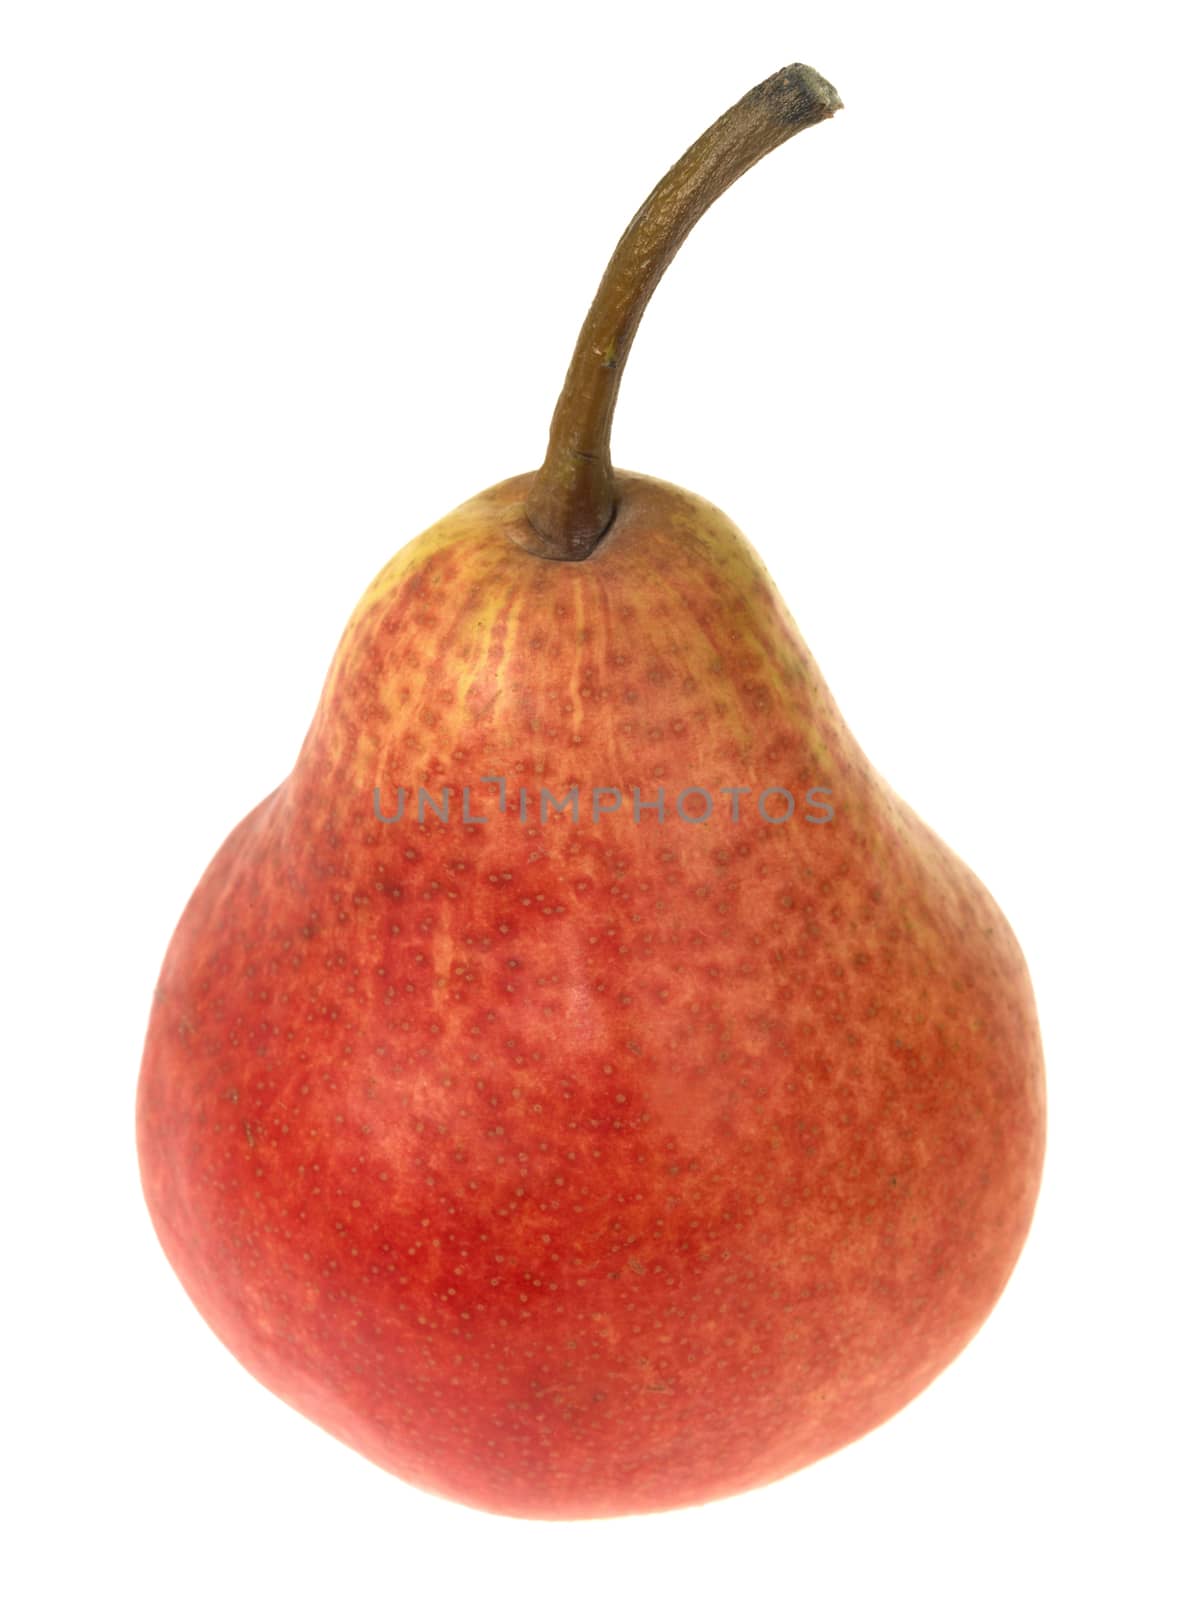 Red William Pear by Whiteboxmedia